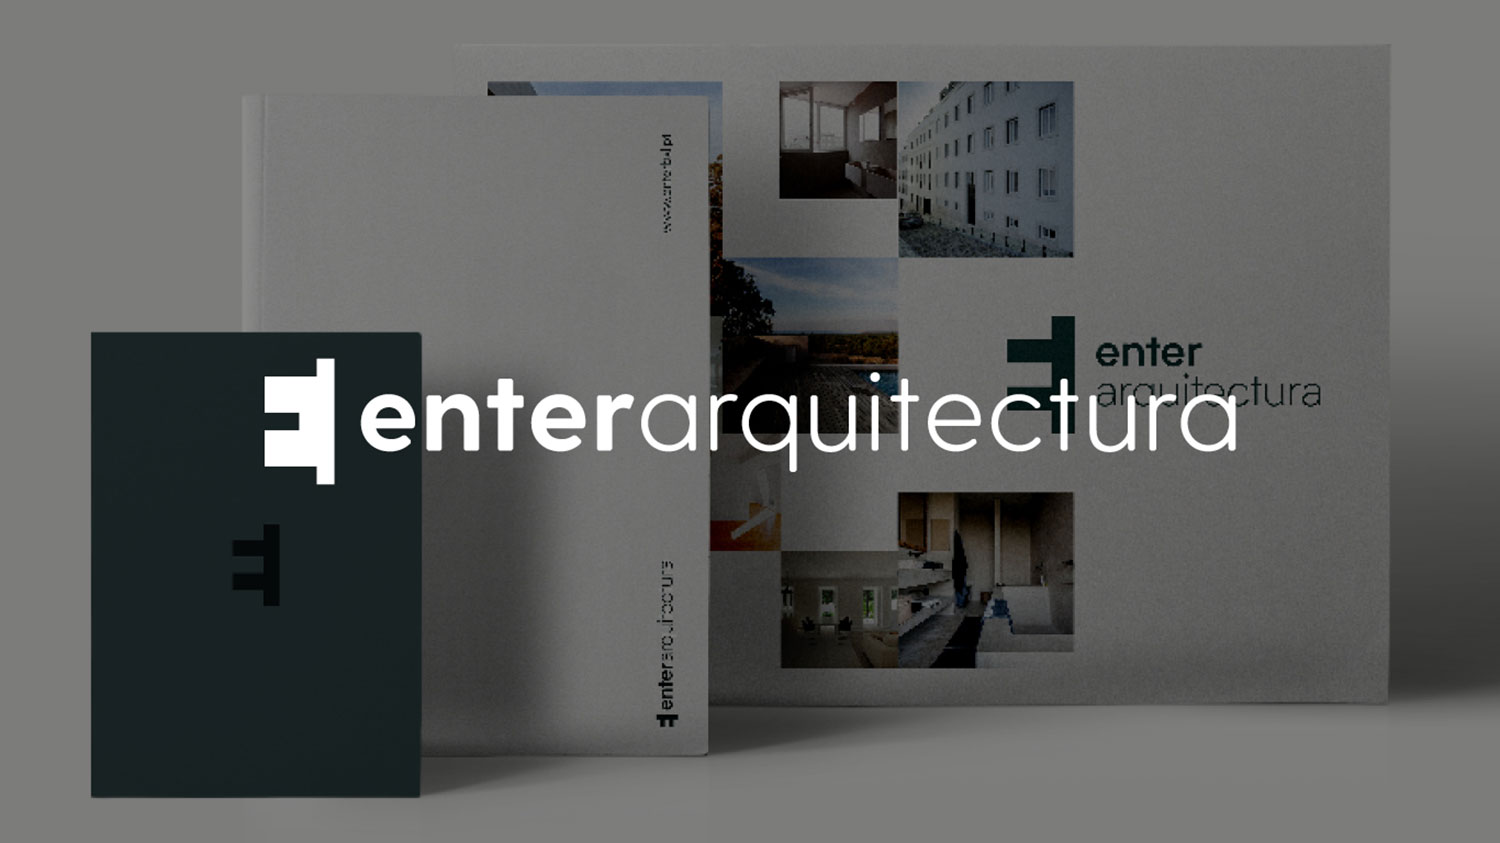 Enter Arquitectura by Miguel Guedes Ramos